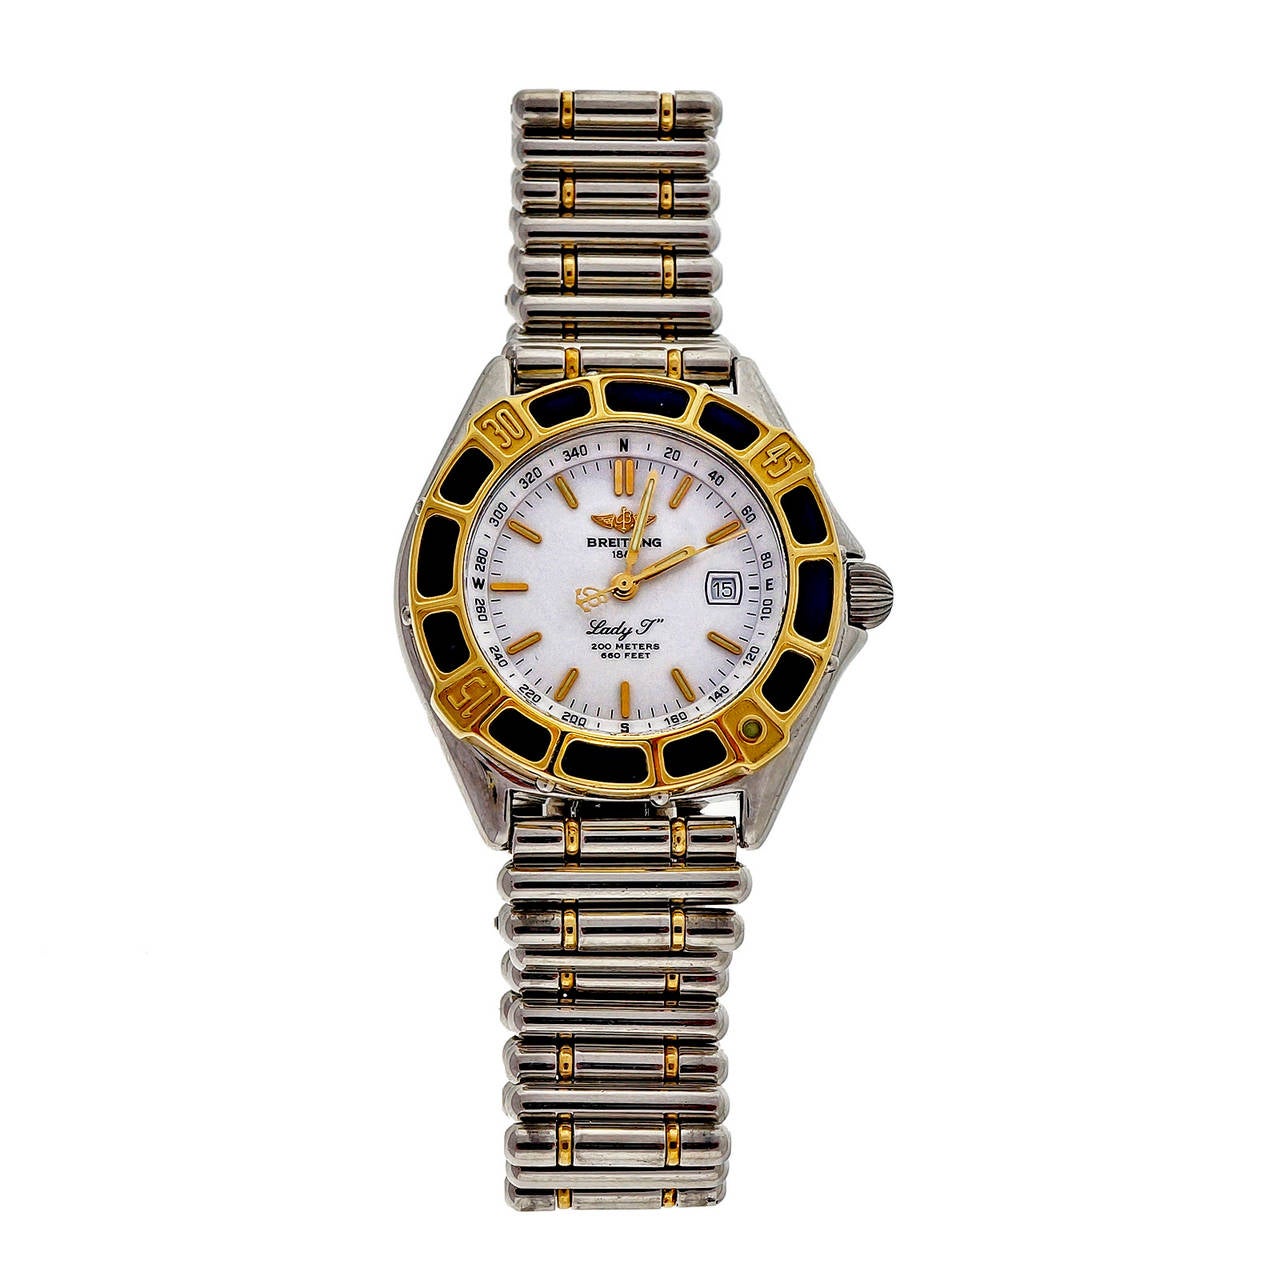 Breitling steel and 18k yellow gold Lady J Quartz wrist watch with date and rotating bezel rim. Water resistant to 660 feet.

18k yellow gold
Length: 35mm
Width: 31mm
Band width at case: 17mm
Case thickness: 9.38mm
Band: Breitling Steel &